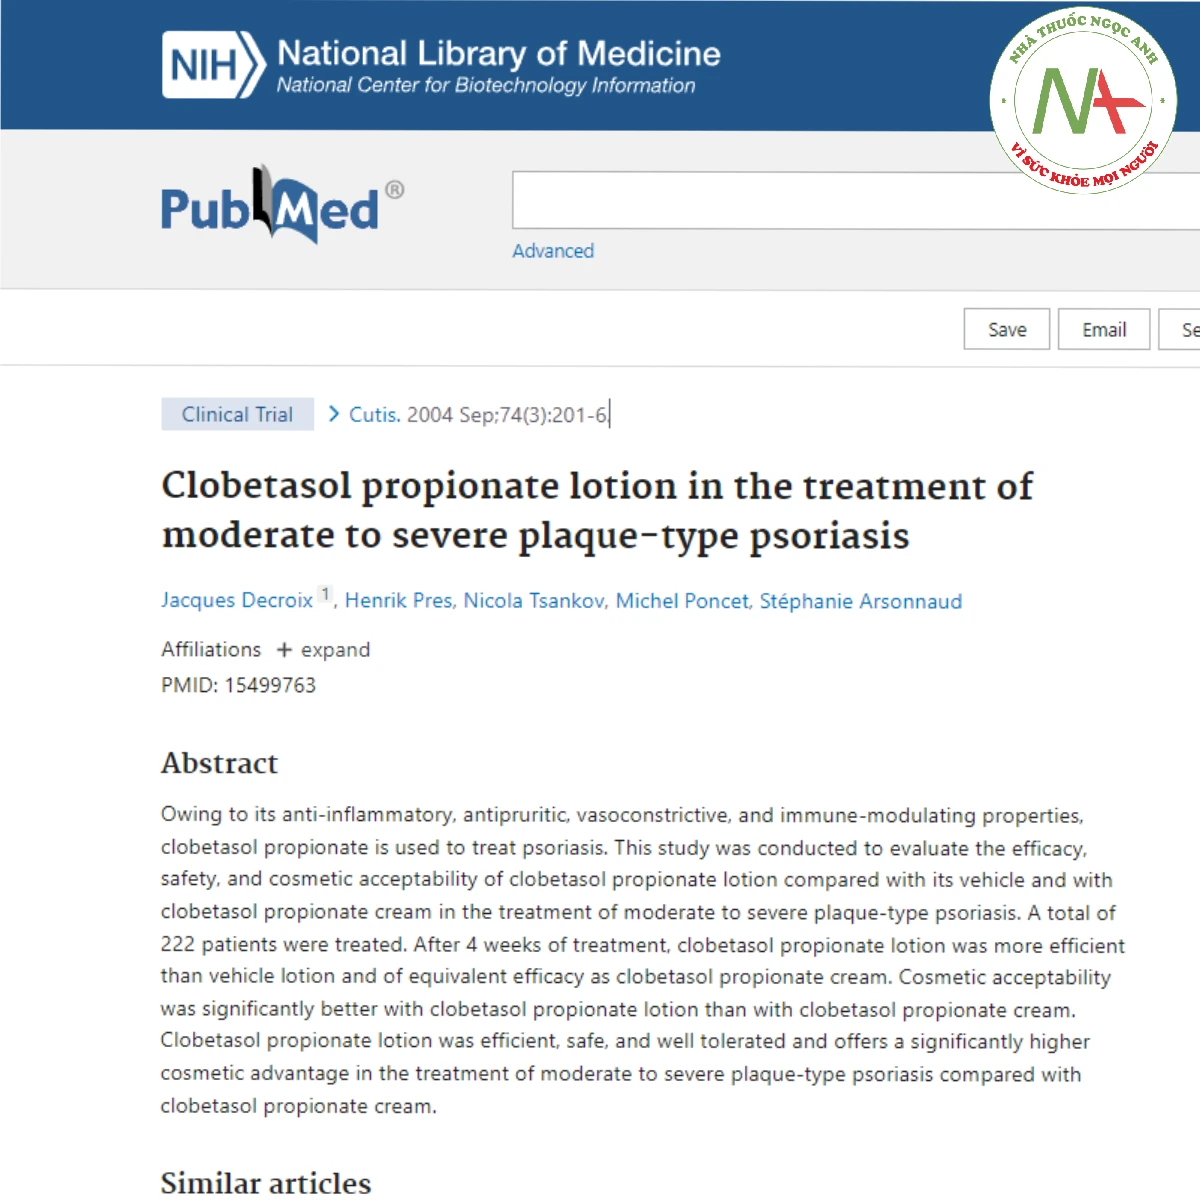 Clobetasol propionate lotion in the treatment of moderate to severe plaque-type psoriasis